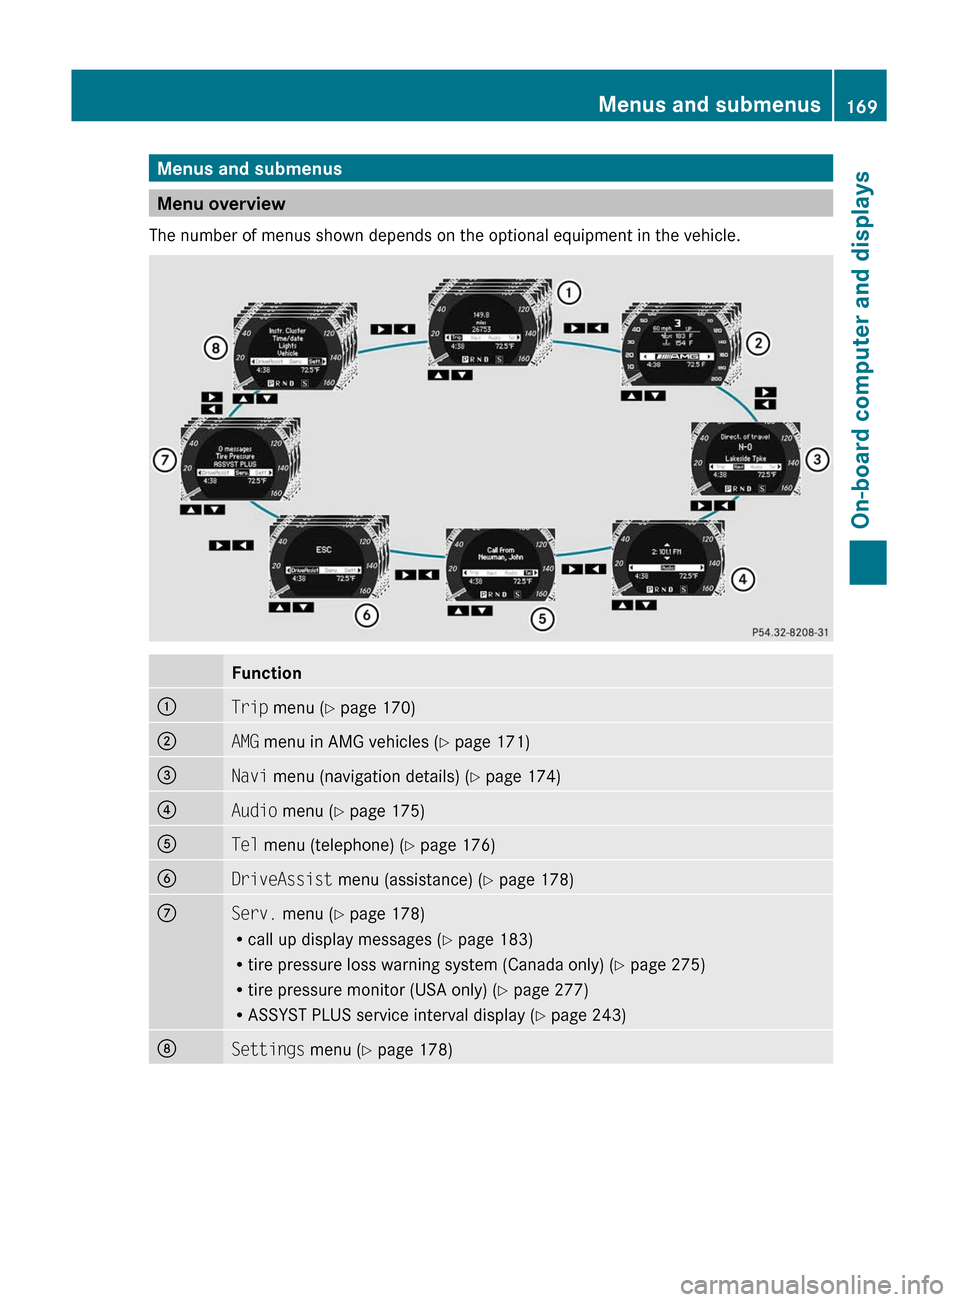 MERCEDES-BENZ C-Class 2011 W204 User Guide Menus and submenus
Menu overview
The number of menus shown depends on the optional equipment in the vehicle. 
Function:Trip  menu ( Y page 170);AMG  menu in AMG vehicles ( Y page 171)=Navi  menu (navi